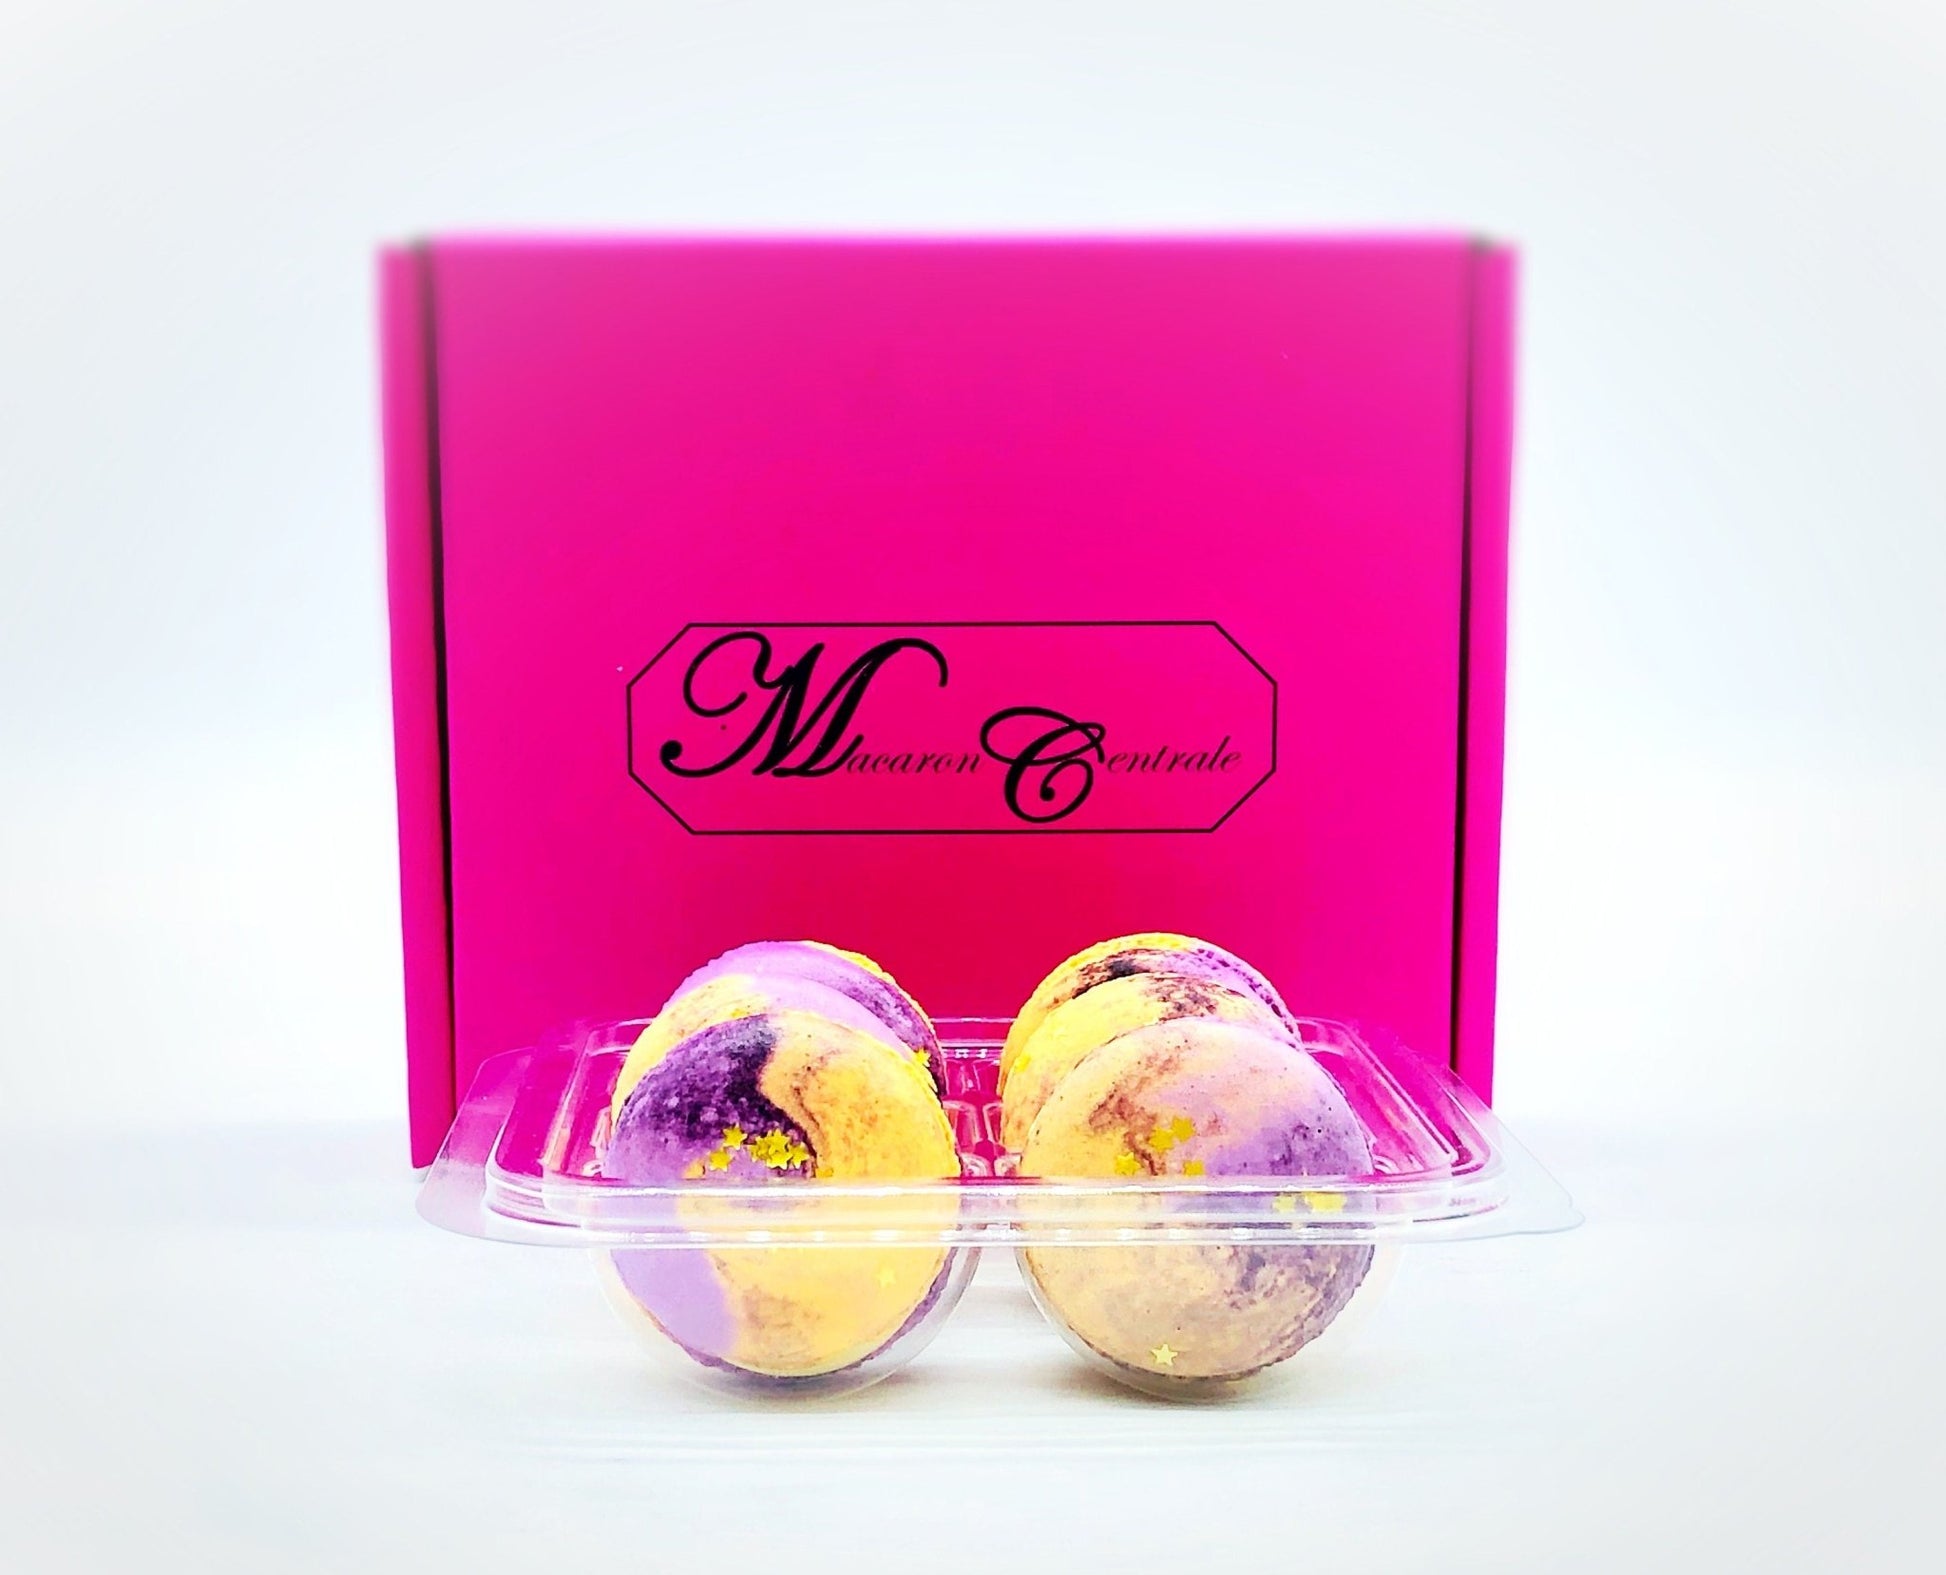 Raspberry Caramel French Macaron | Available in 6, 12 & 24 - Macaron Centrale6 Pack